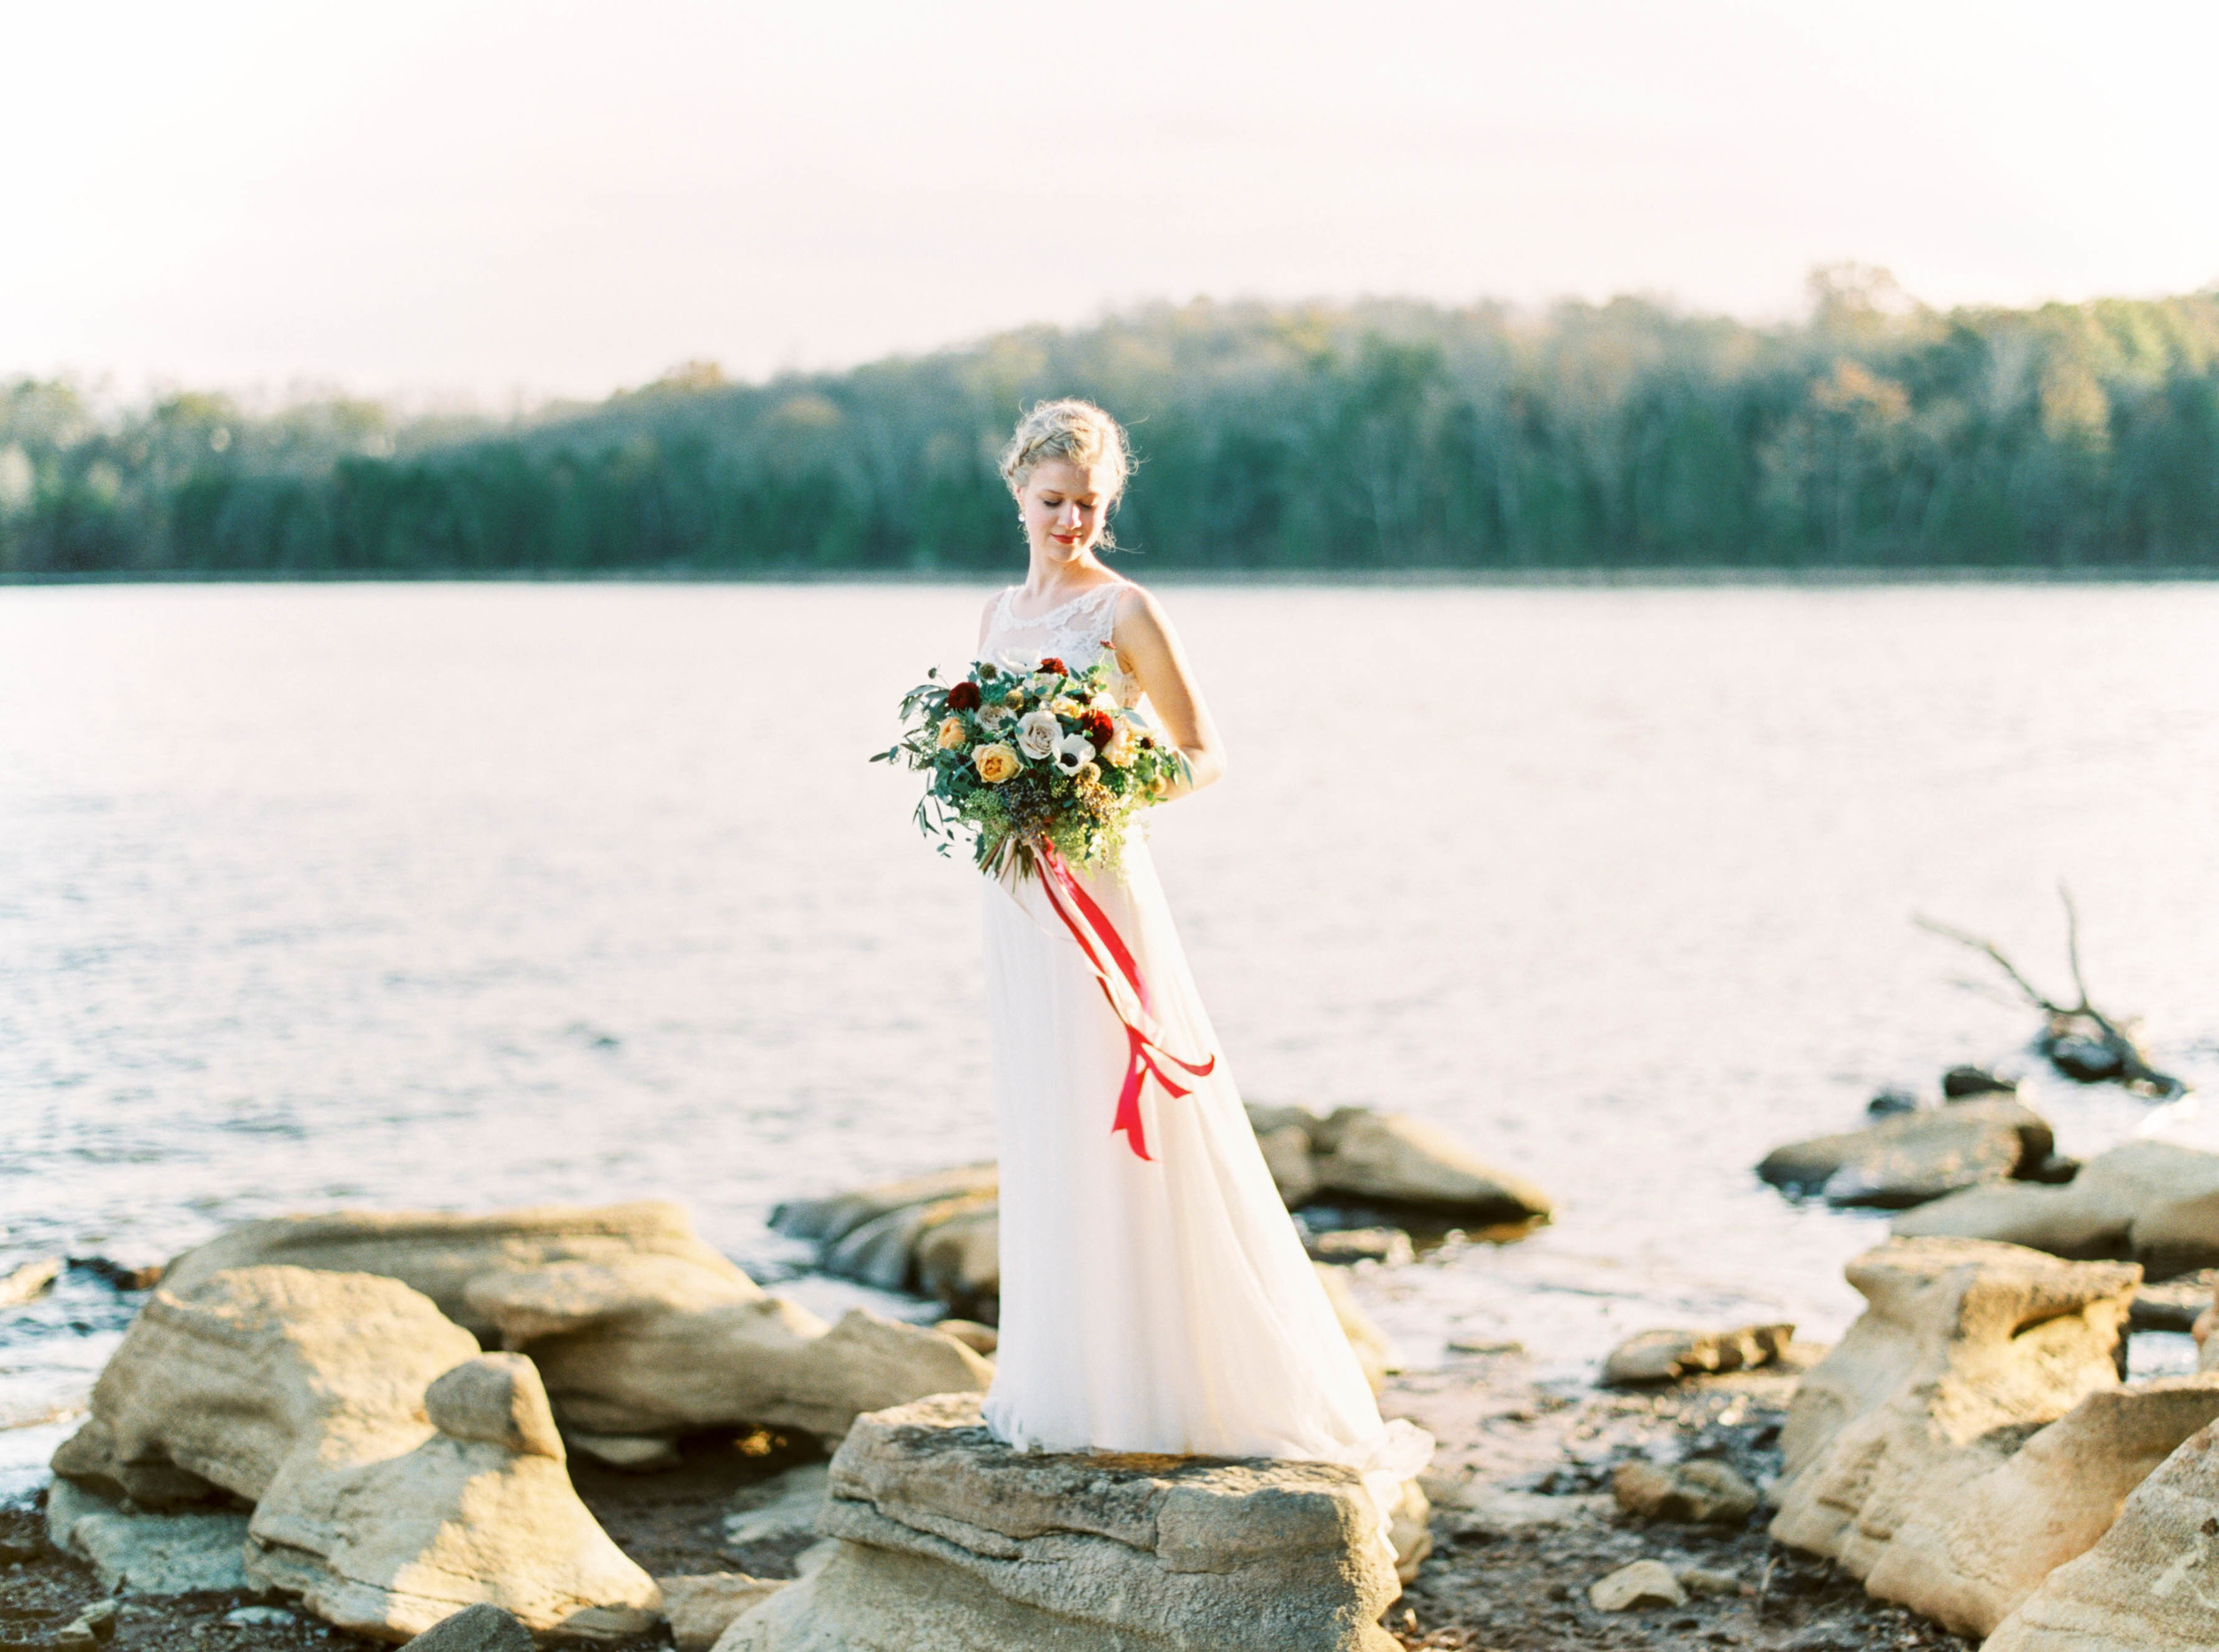 Lakeside Wedding Inspiration // Loose, natural bridal bouquet with cranberry and blush silk ribbon